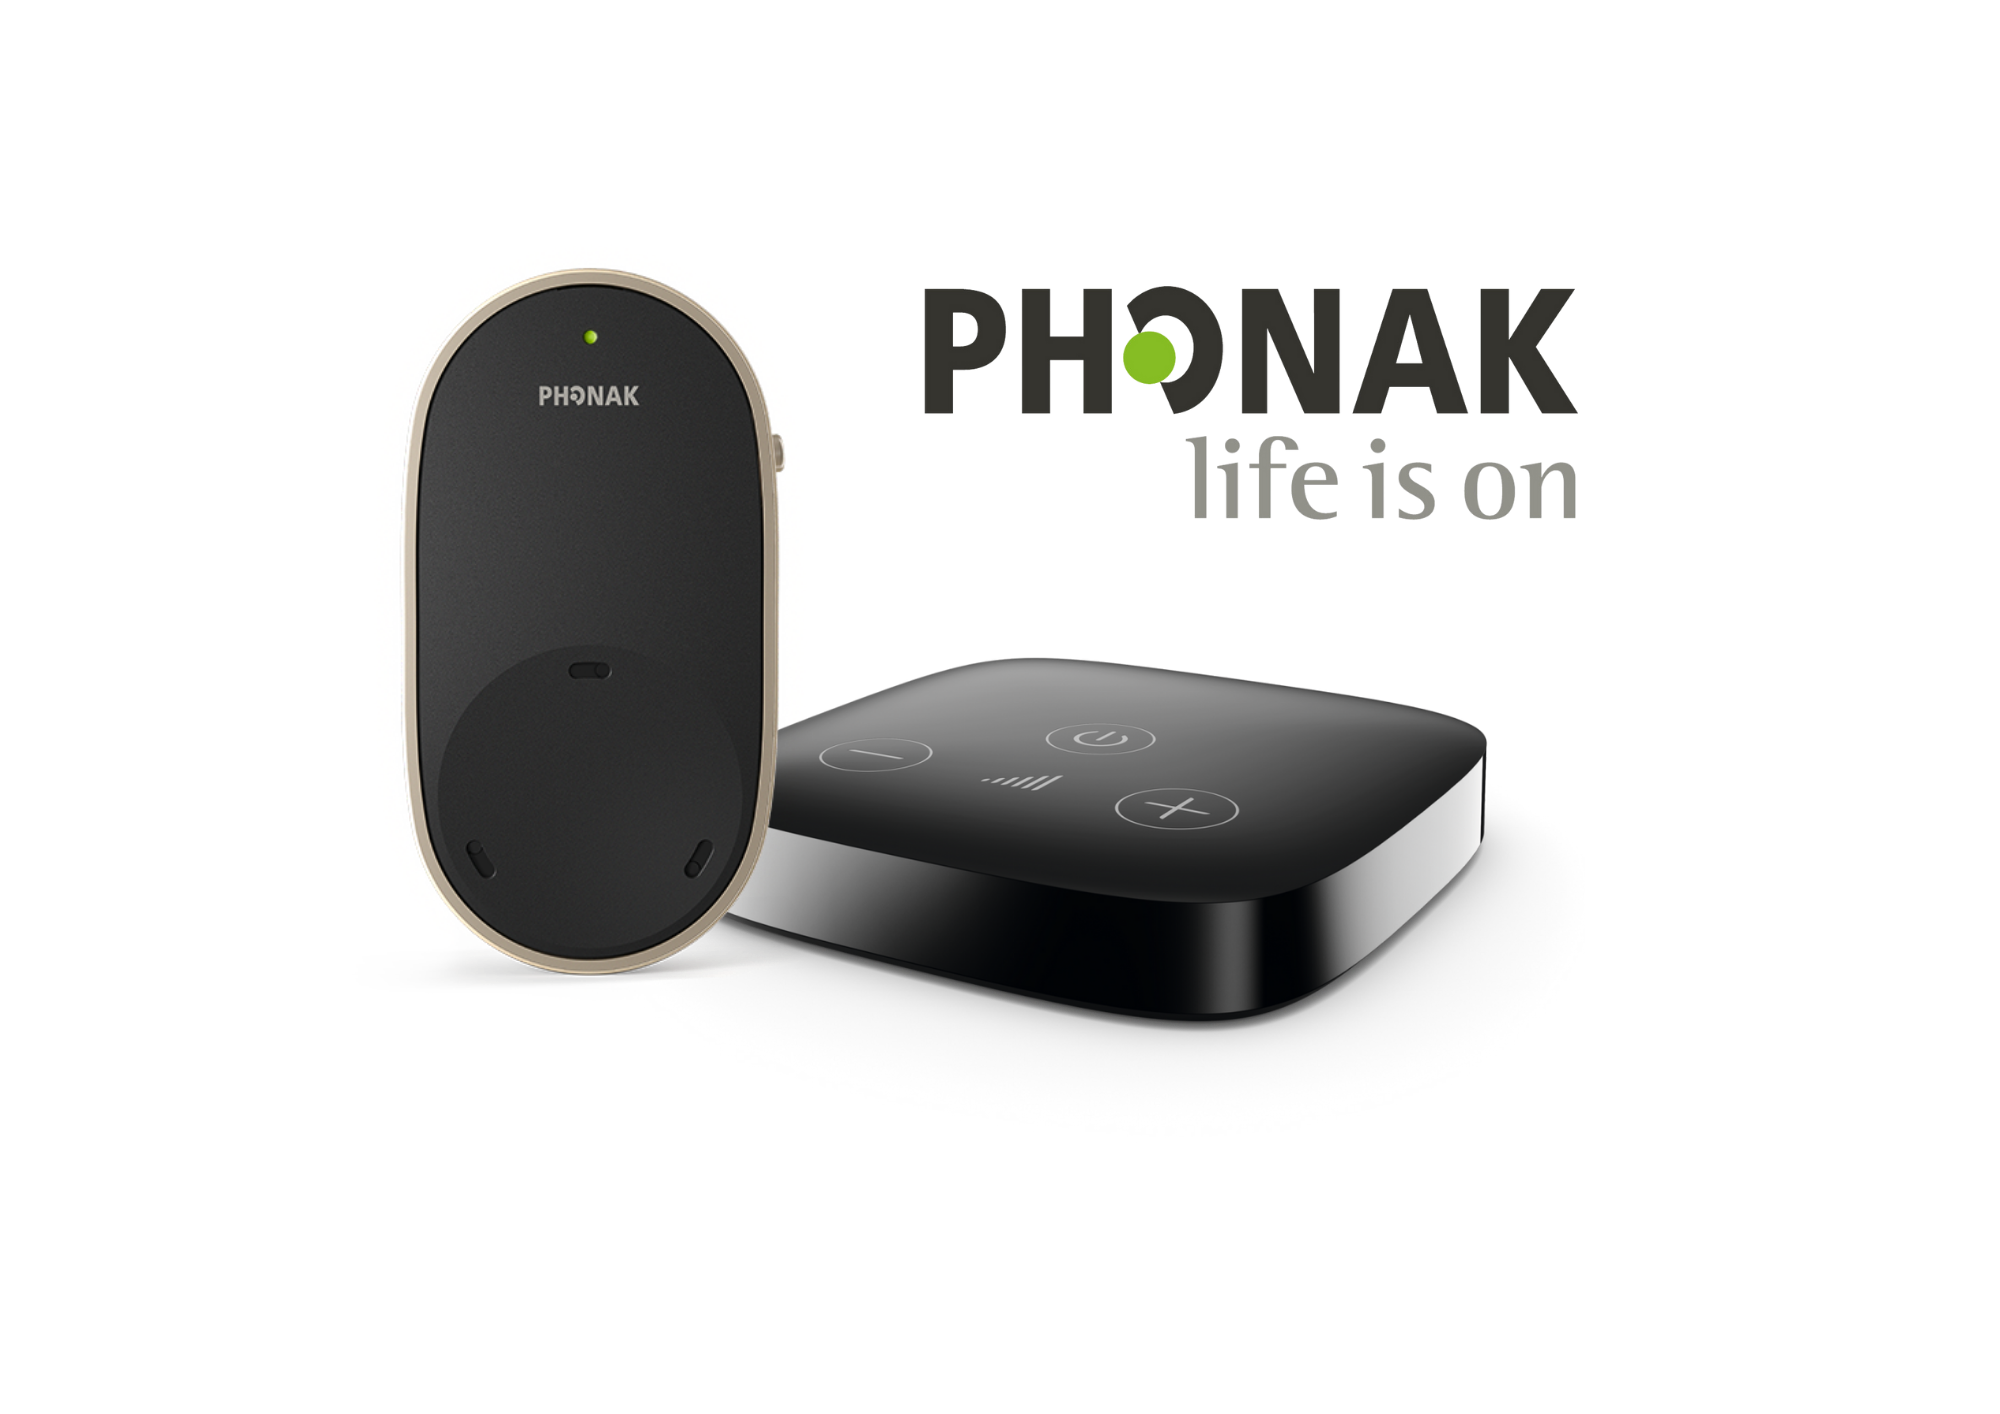 Phonak Wireless Accessories including TV connector and PartnerMic